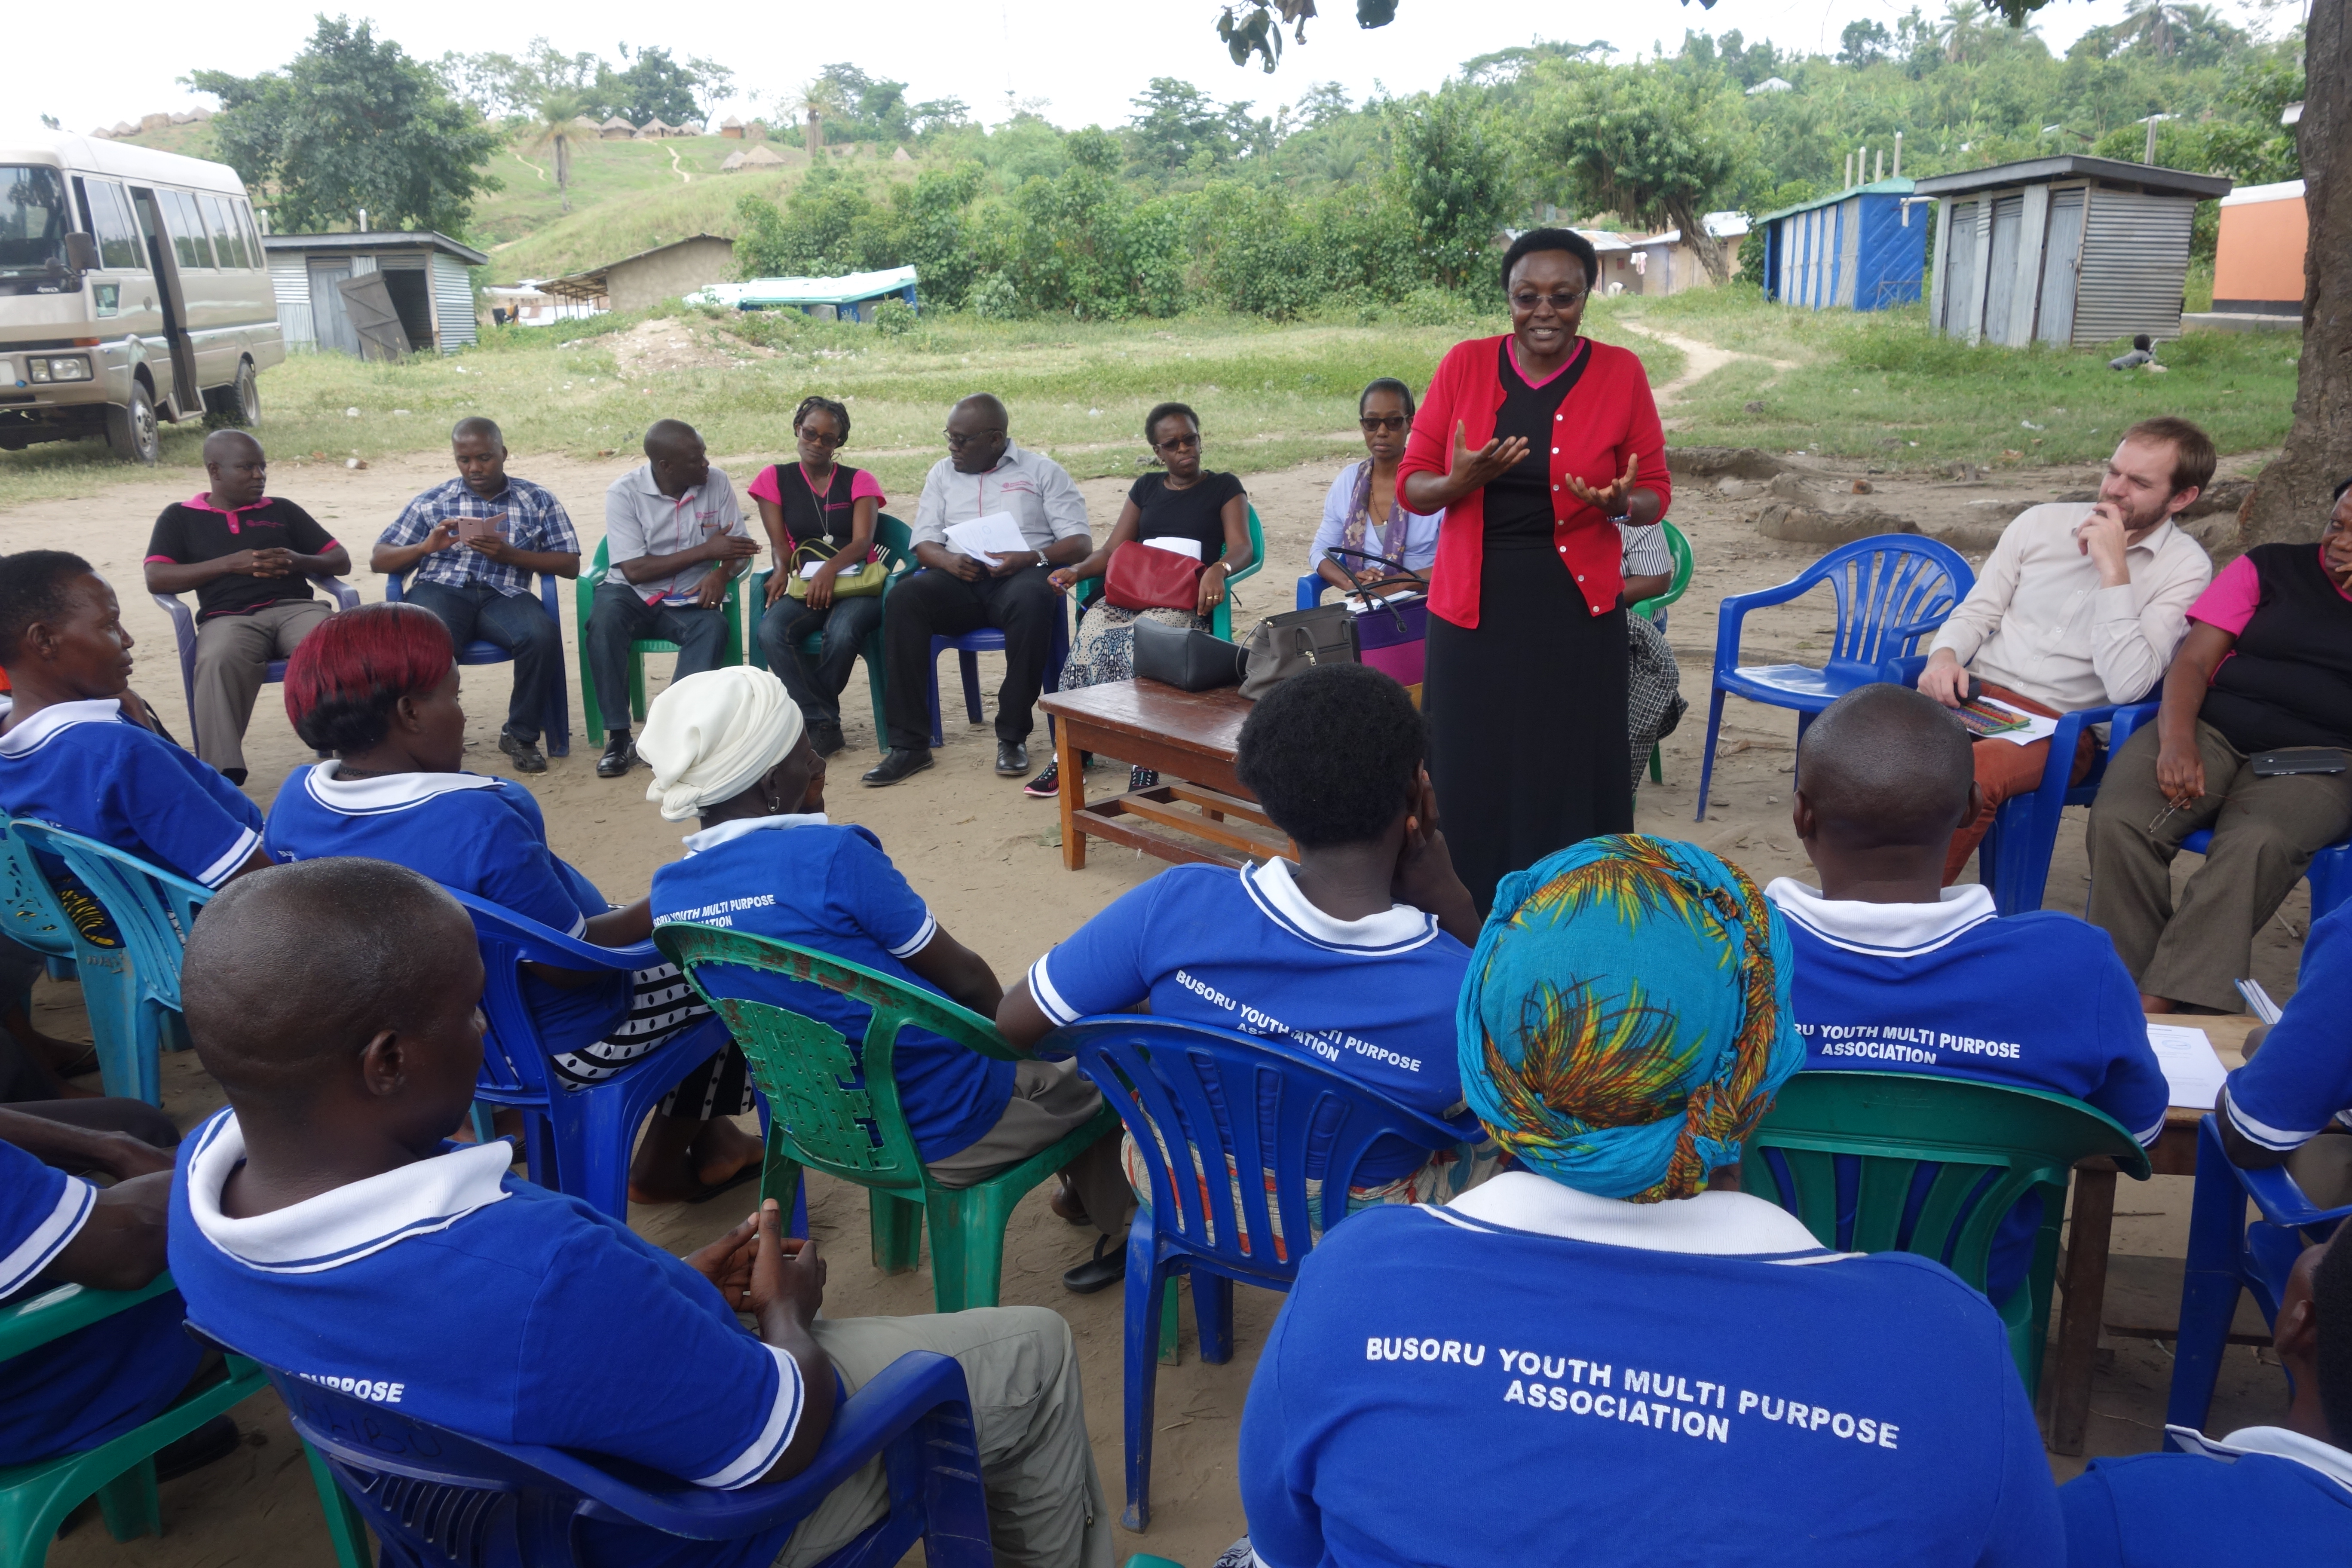 A Board Member of Soluti Finance East Africa encourages the association members’ on issues presented during the visit.